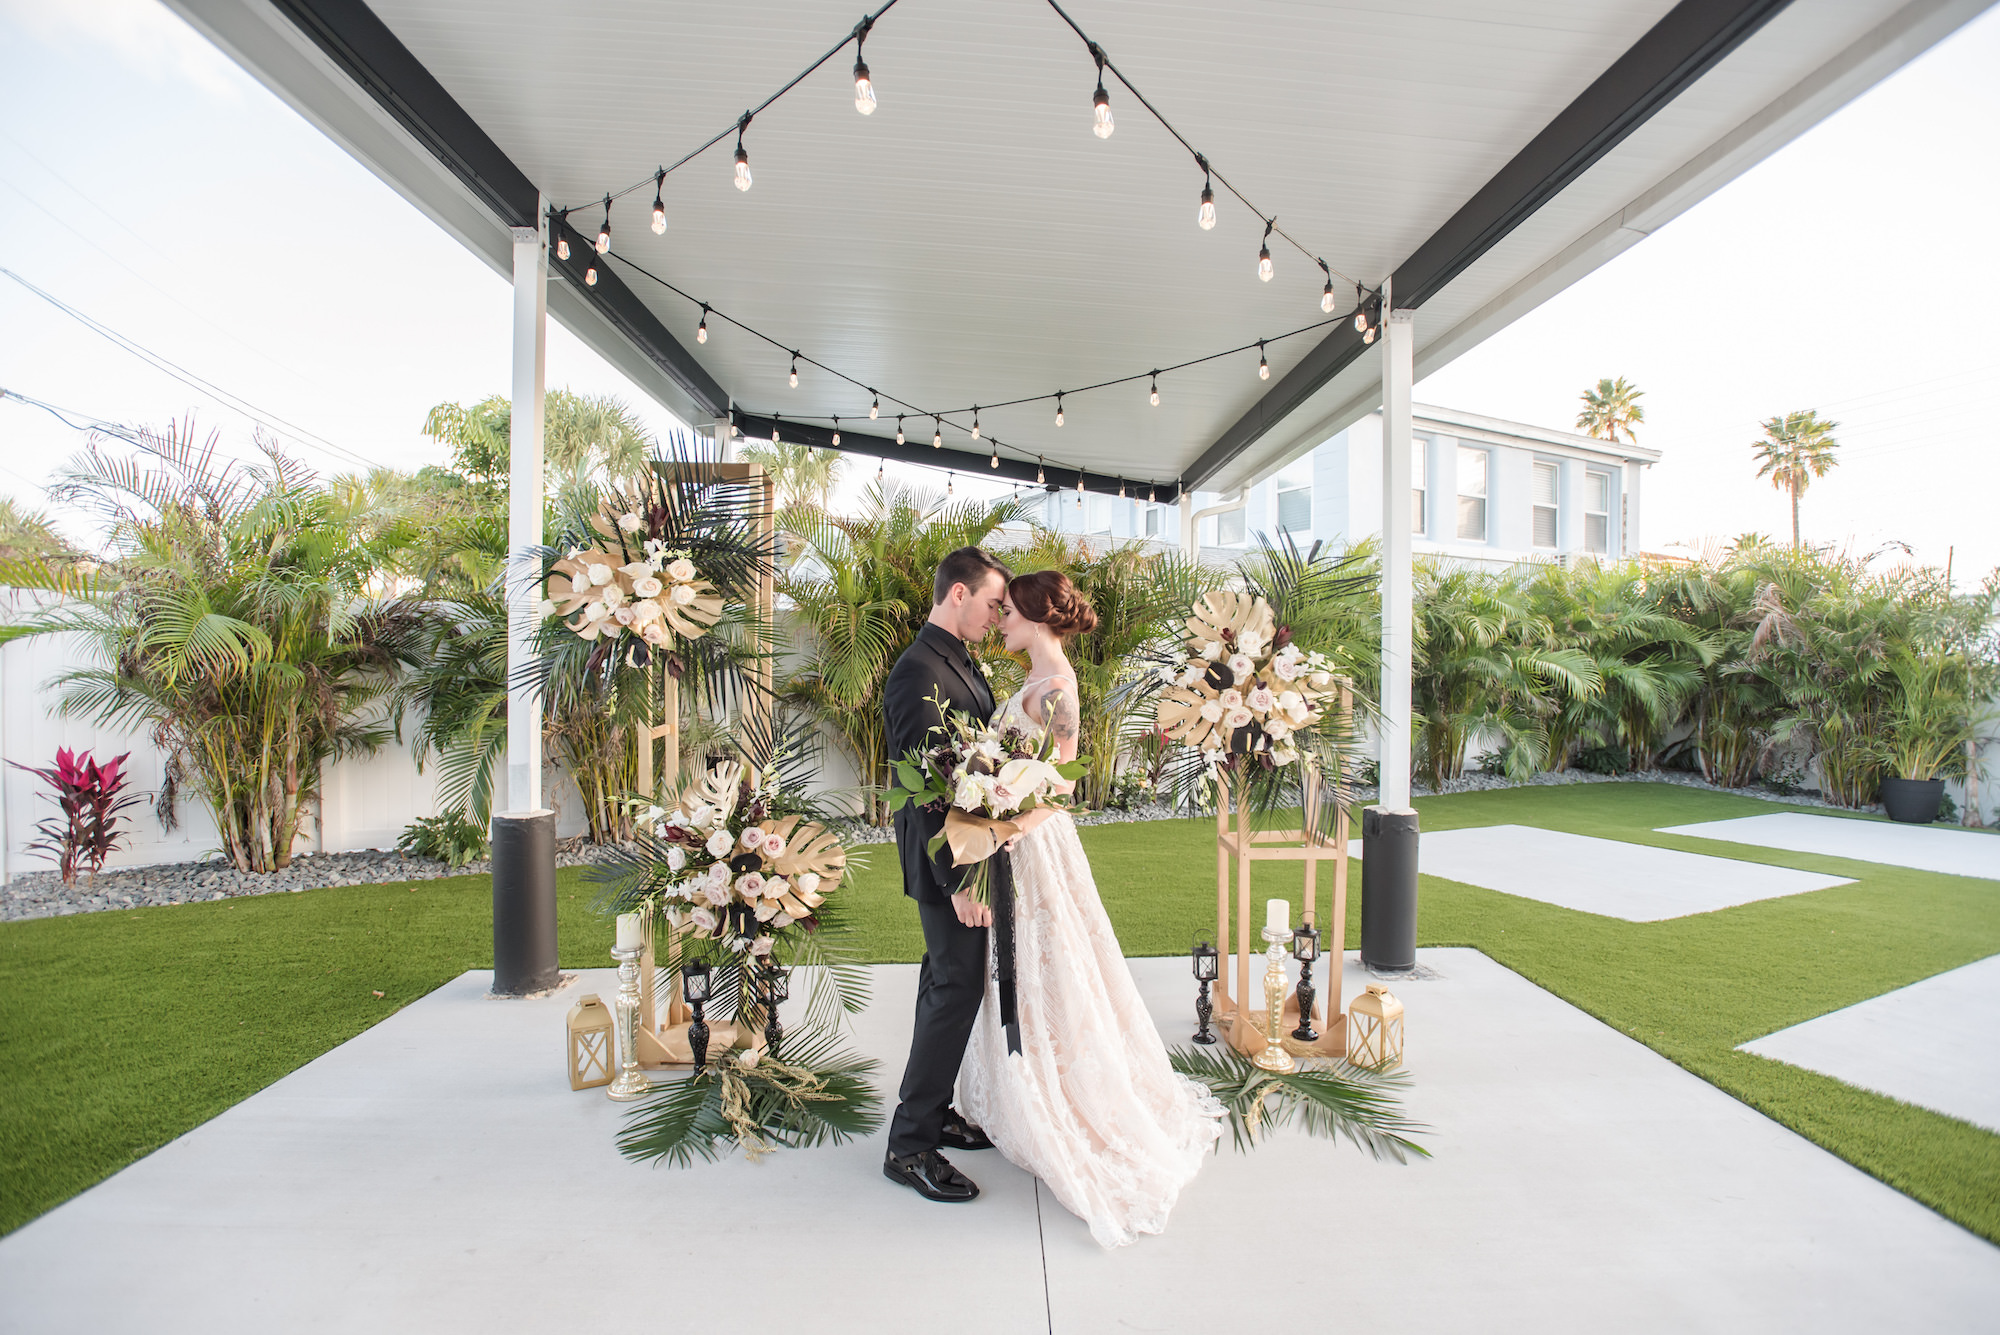 Dark Luxe, Romantic Wedding Decor, Hanging String Lights, Tall Gold Geometric Stands with Gold Monstera Leaves, Palm Fronds, Blush Pink Roses Floral Arrangements, Gold and Black Lanterns | Tampa Bay Wedding Planner Elegant Affairs by Design